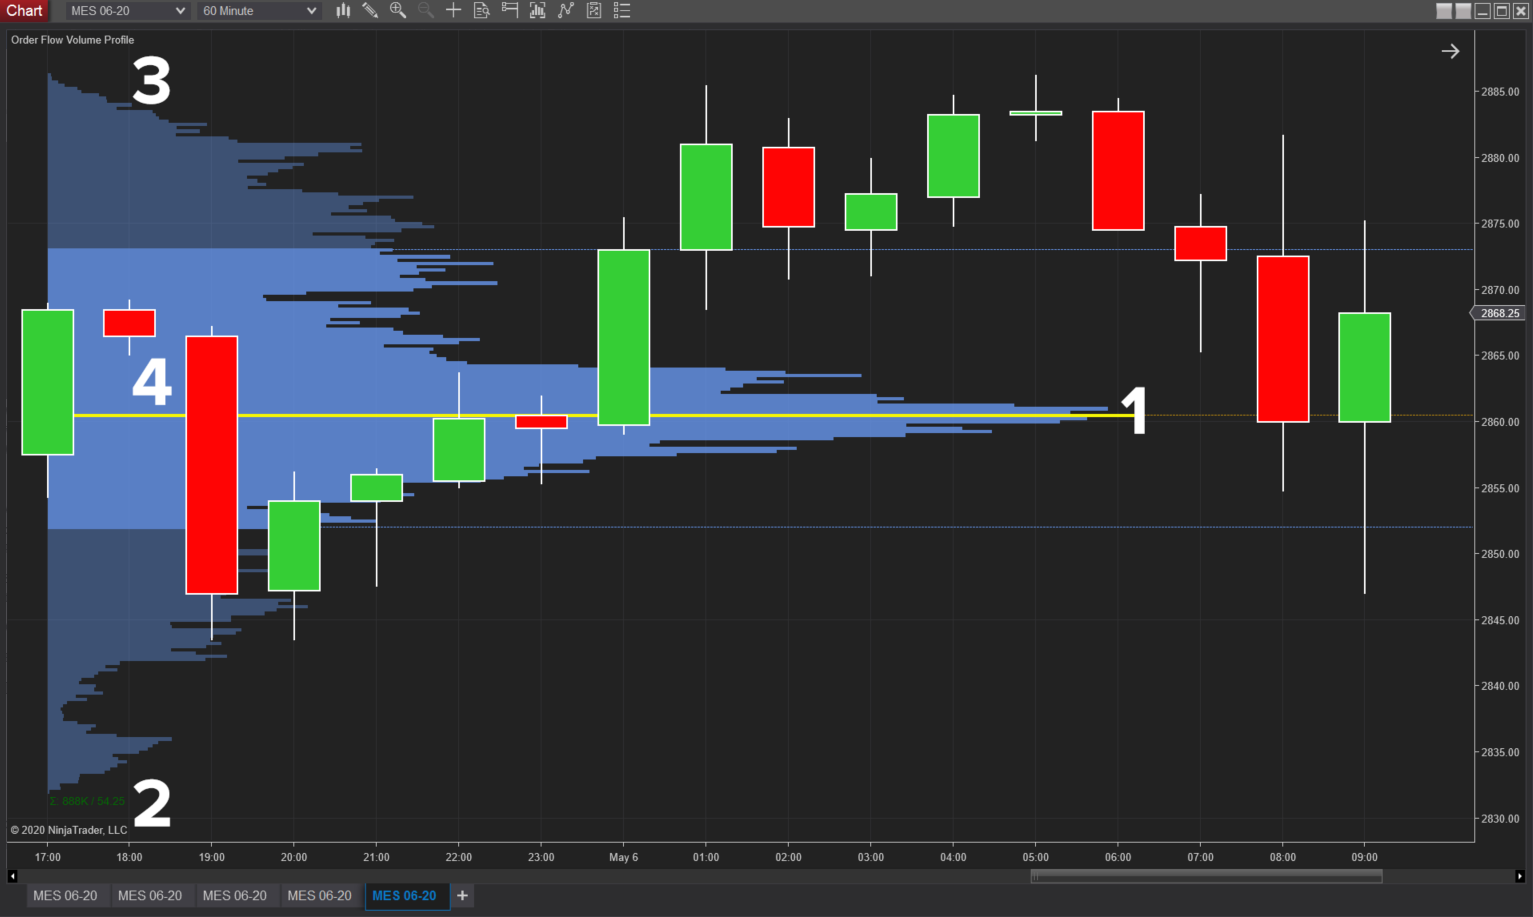 volume-profile-futures-trading-pic5.png